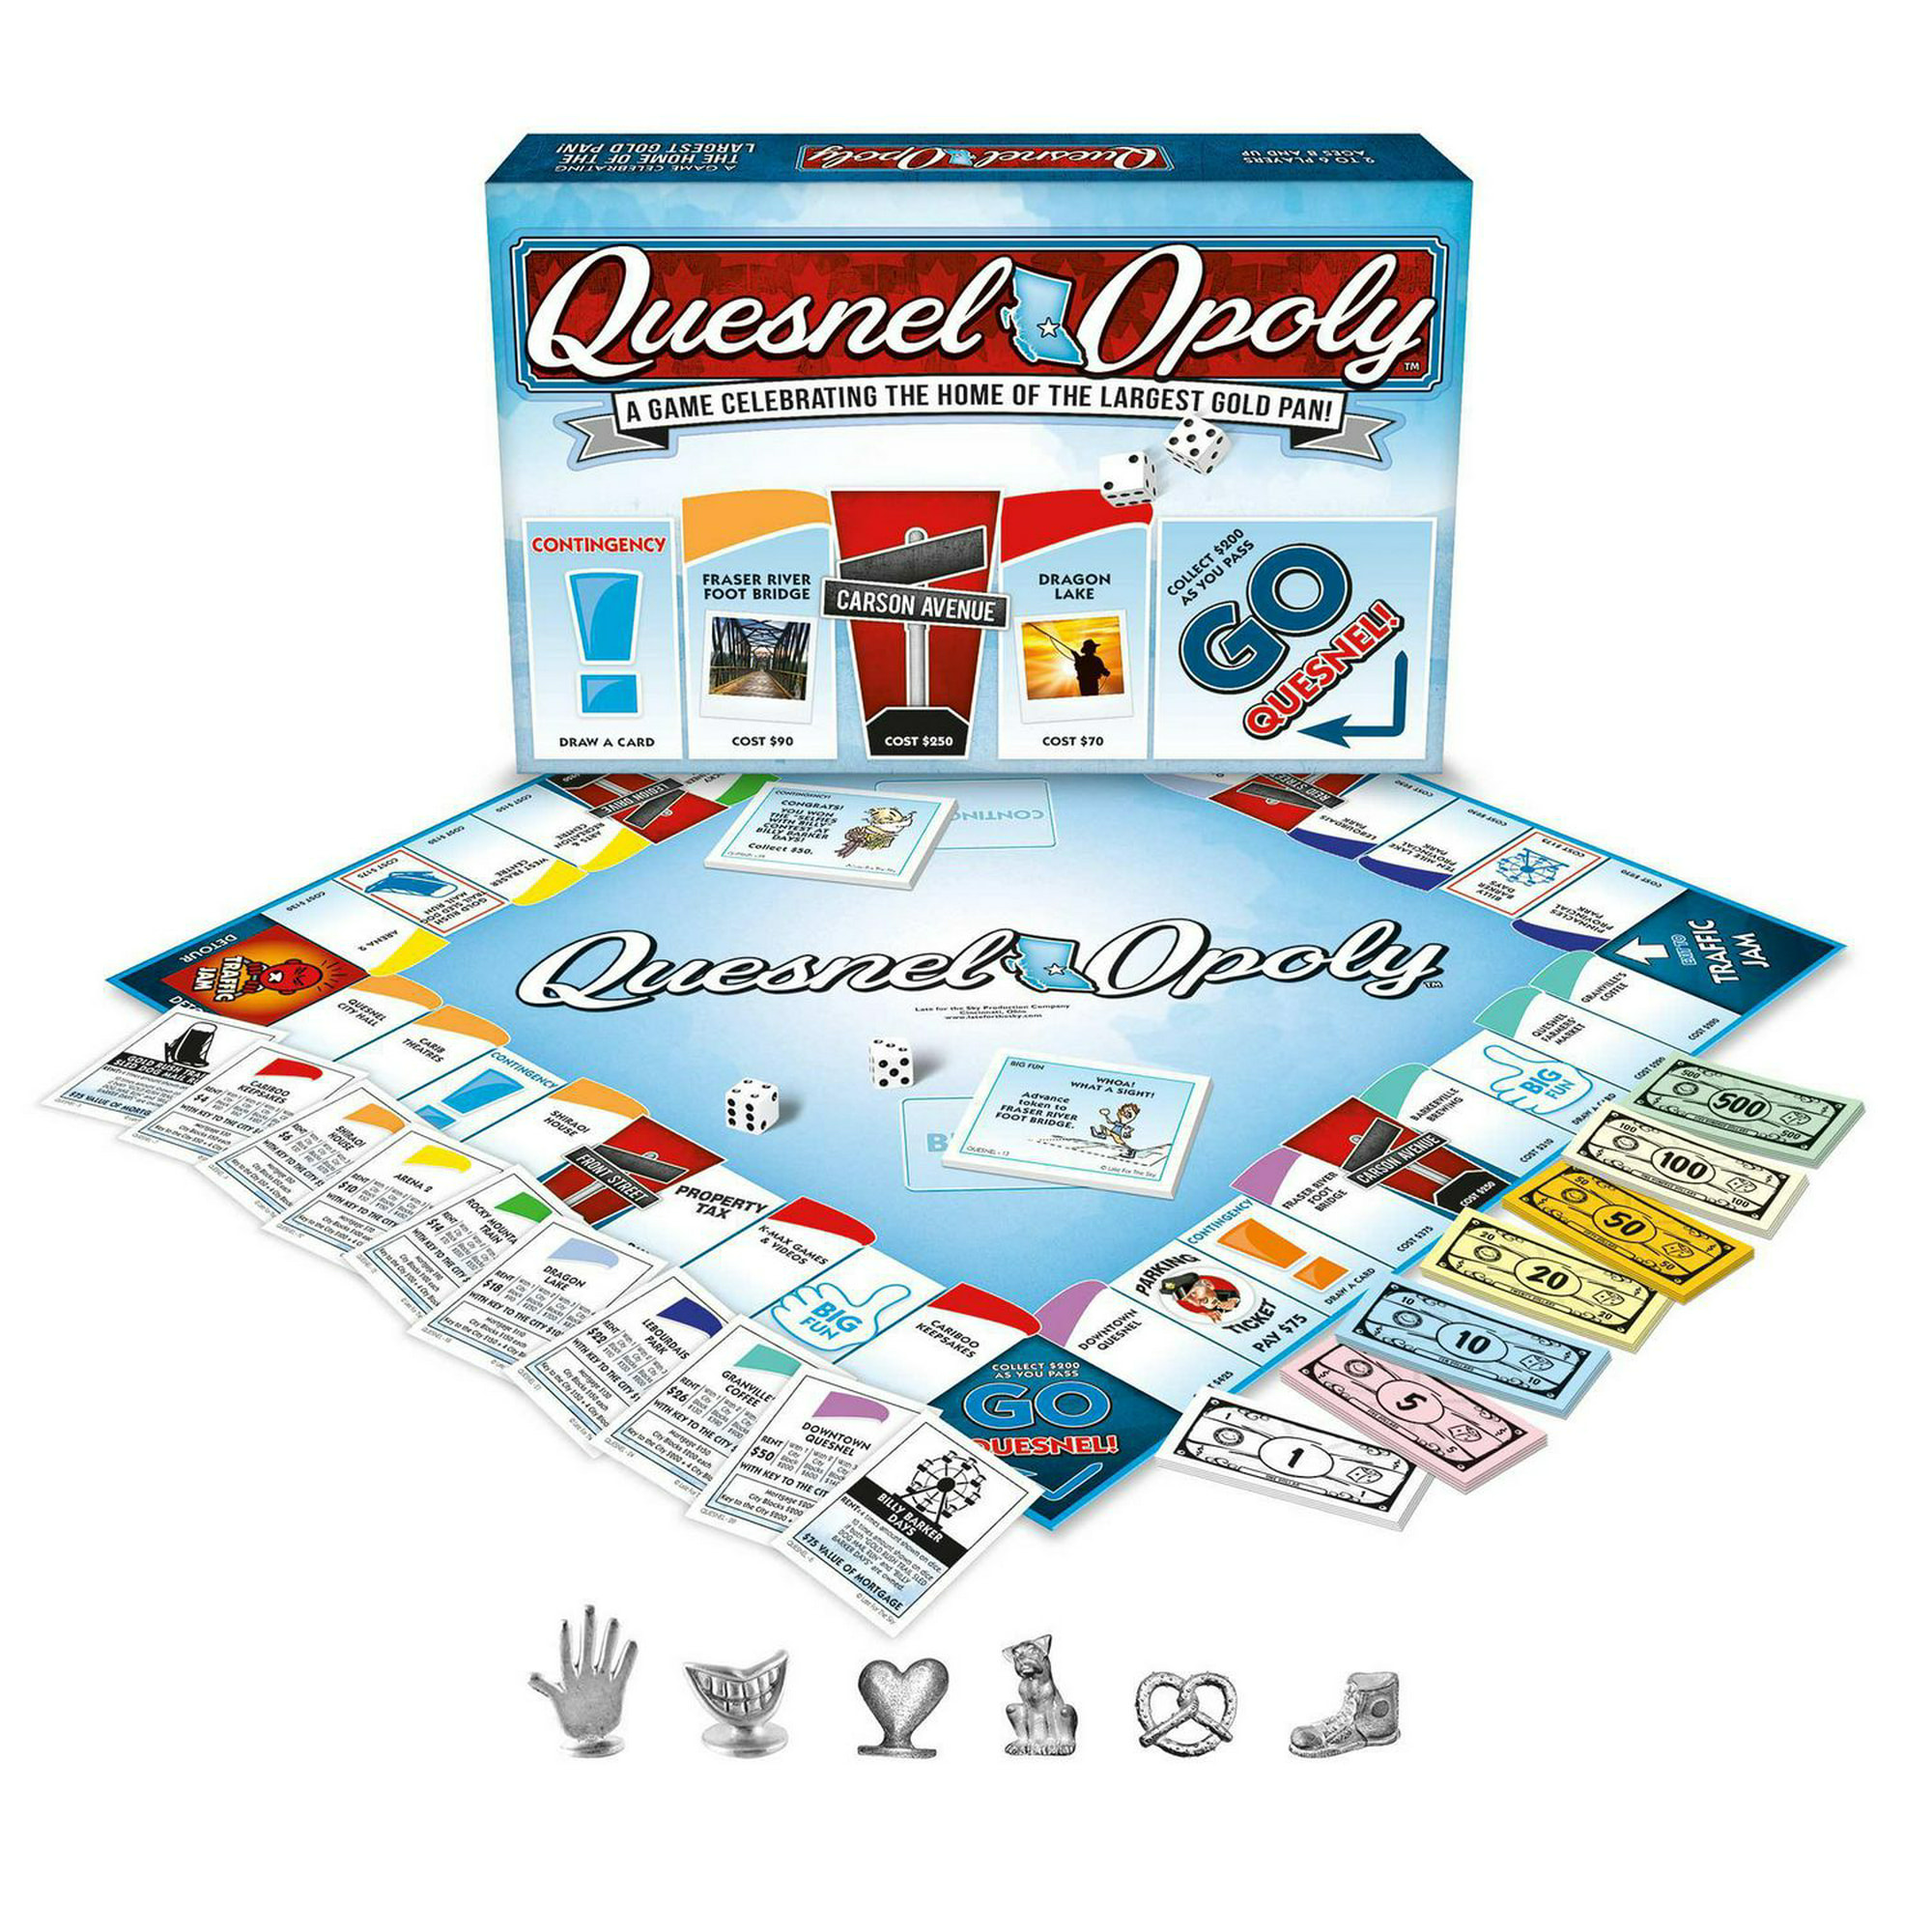 Quesnel-Opoly 